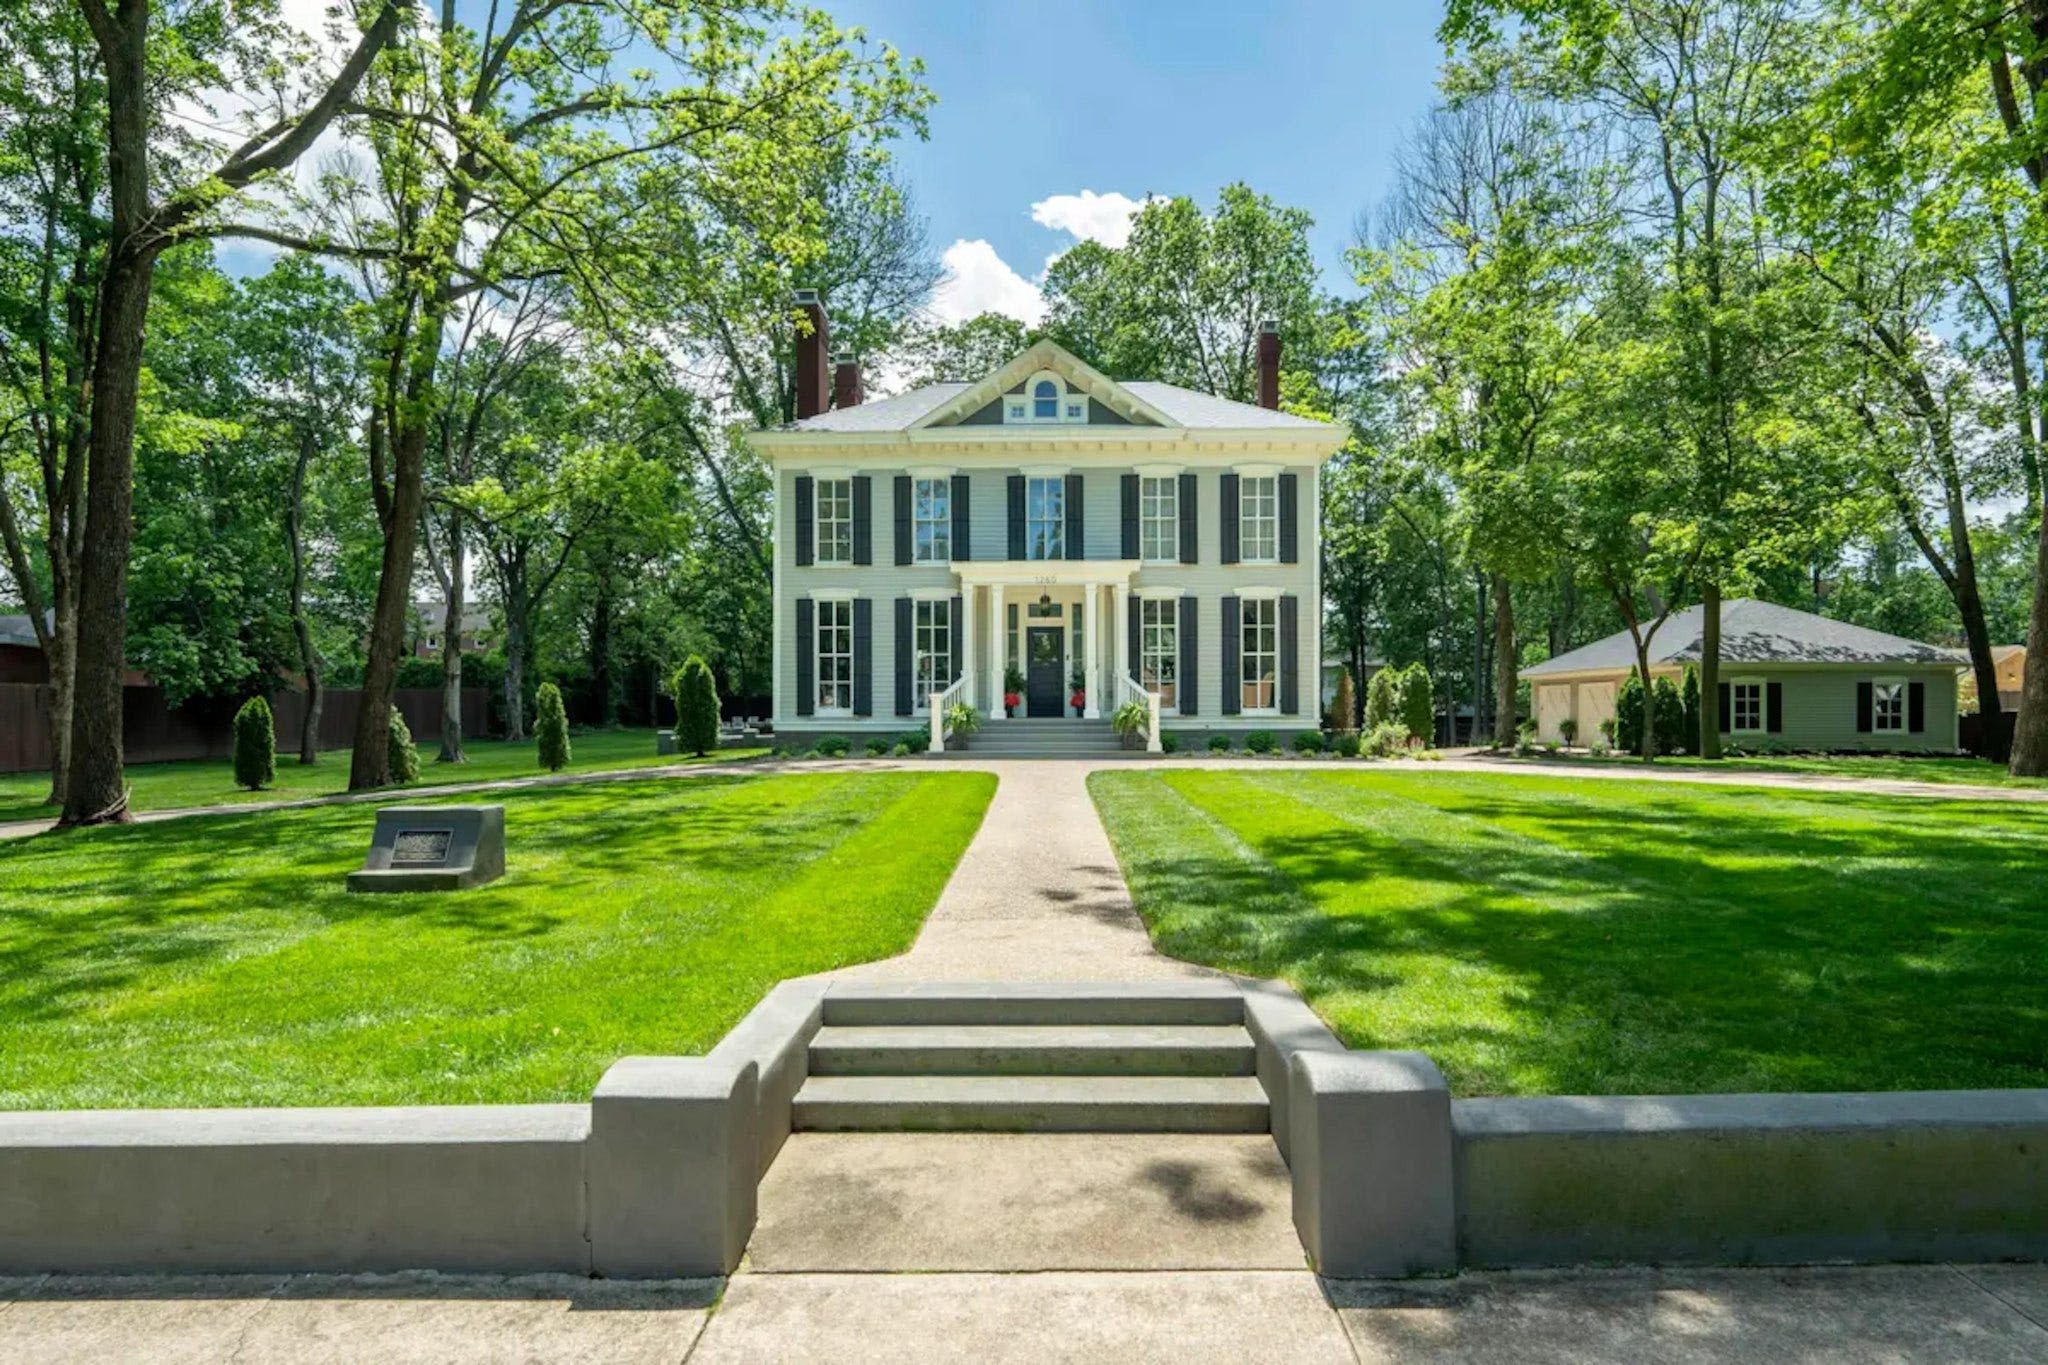 Springfield's oldest standing home cost $6,200 to build. You could own it for $1.2 million